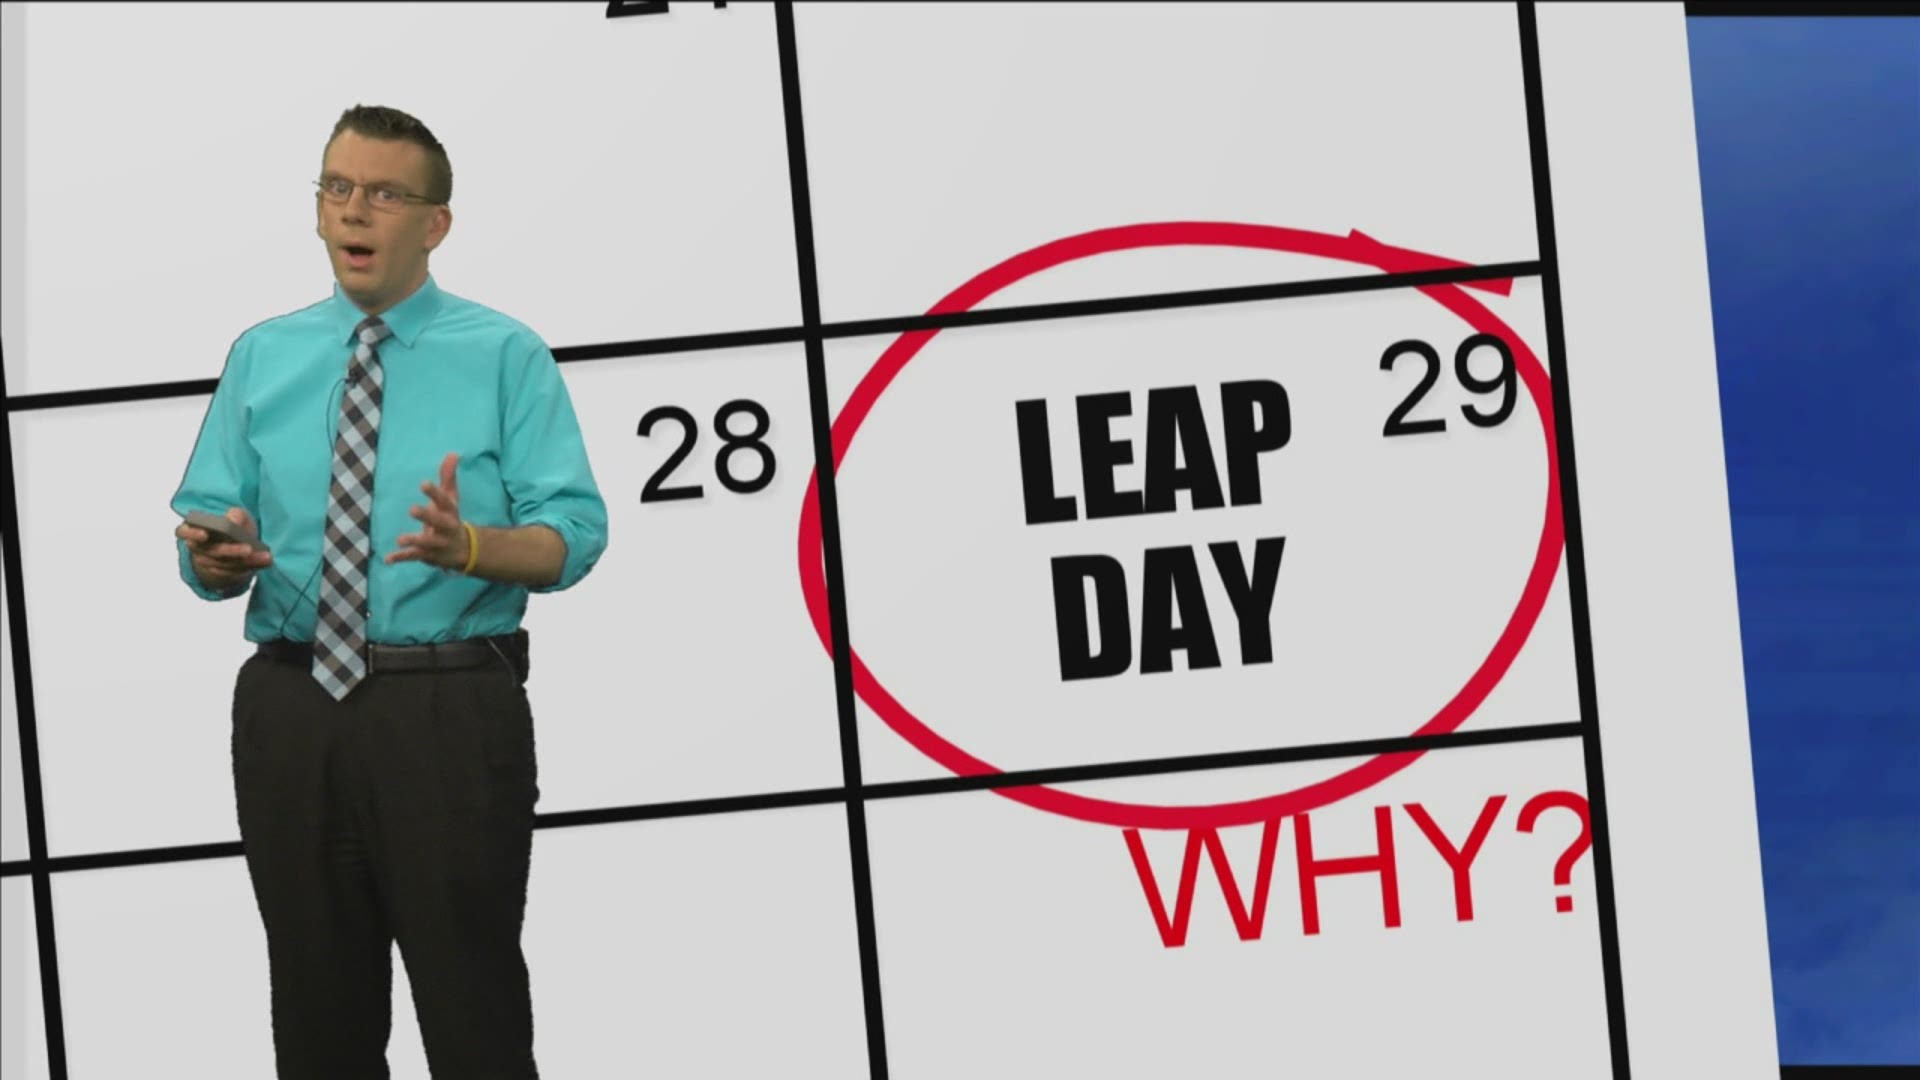 A Leap Day is fascinating. Why do we have one?